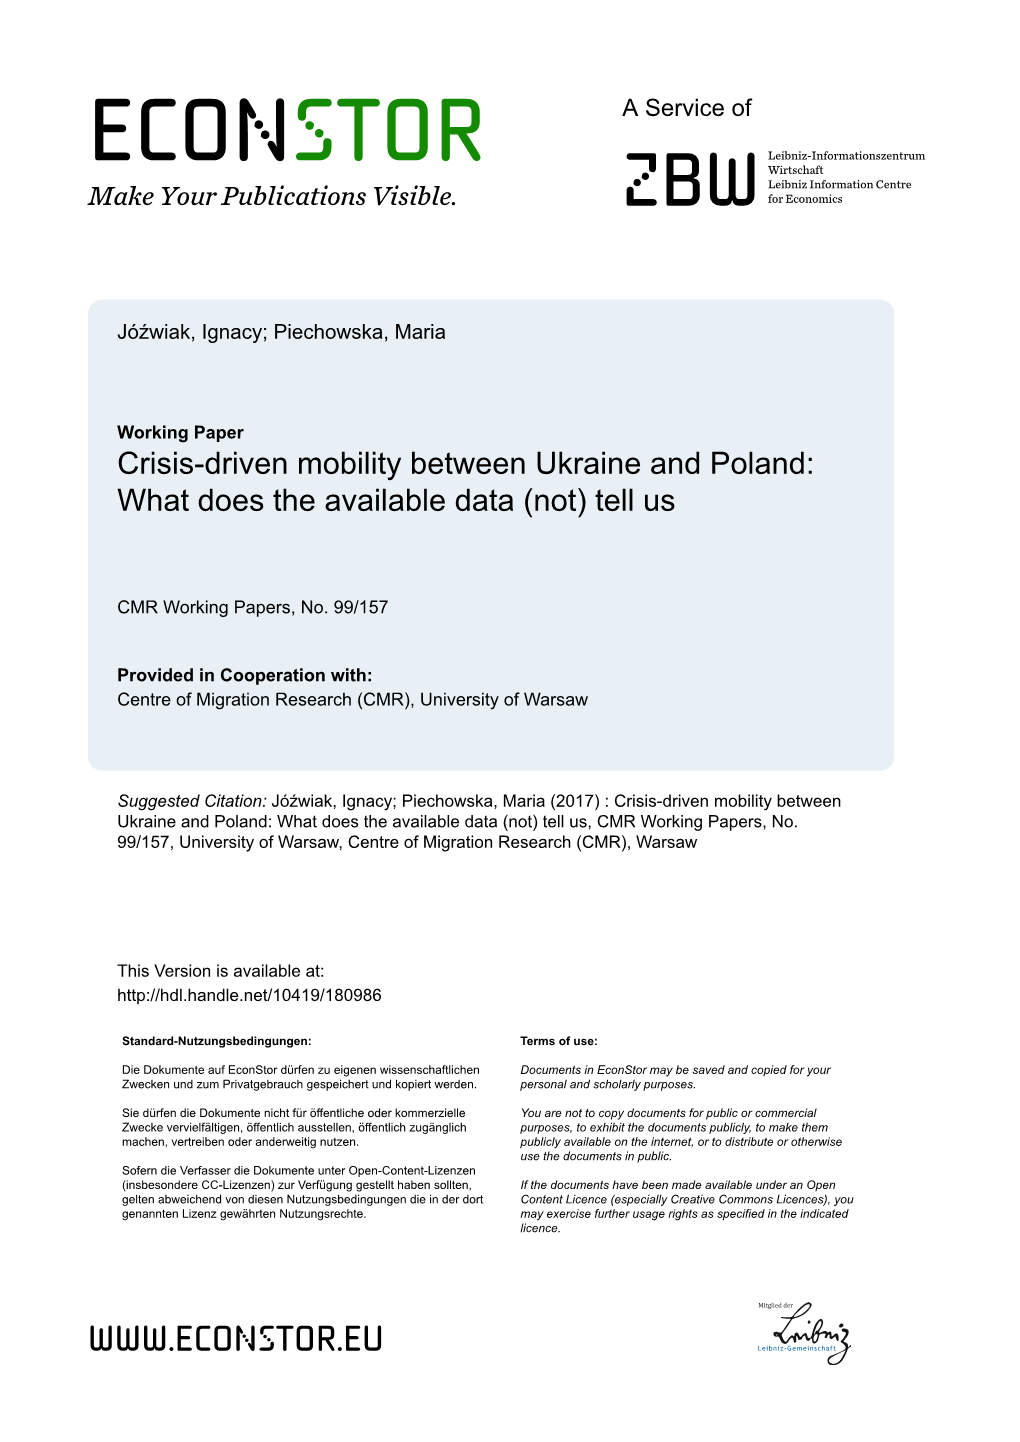 Crisis-Driven Mobility Between Ukraine and Poland: What Does the Available Data (Not) Tell Us